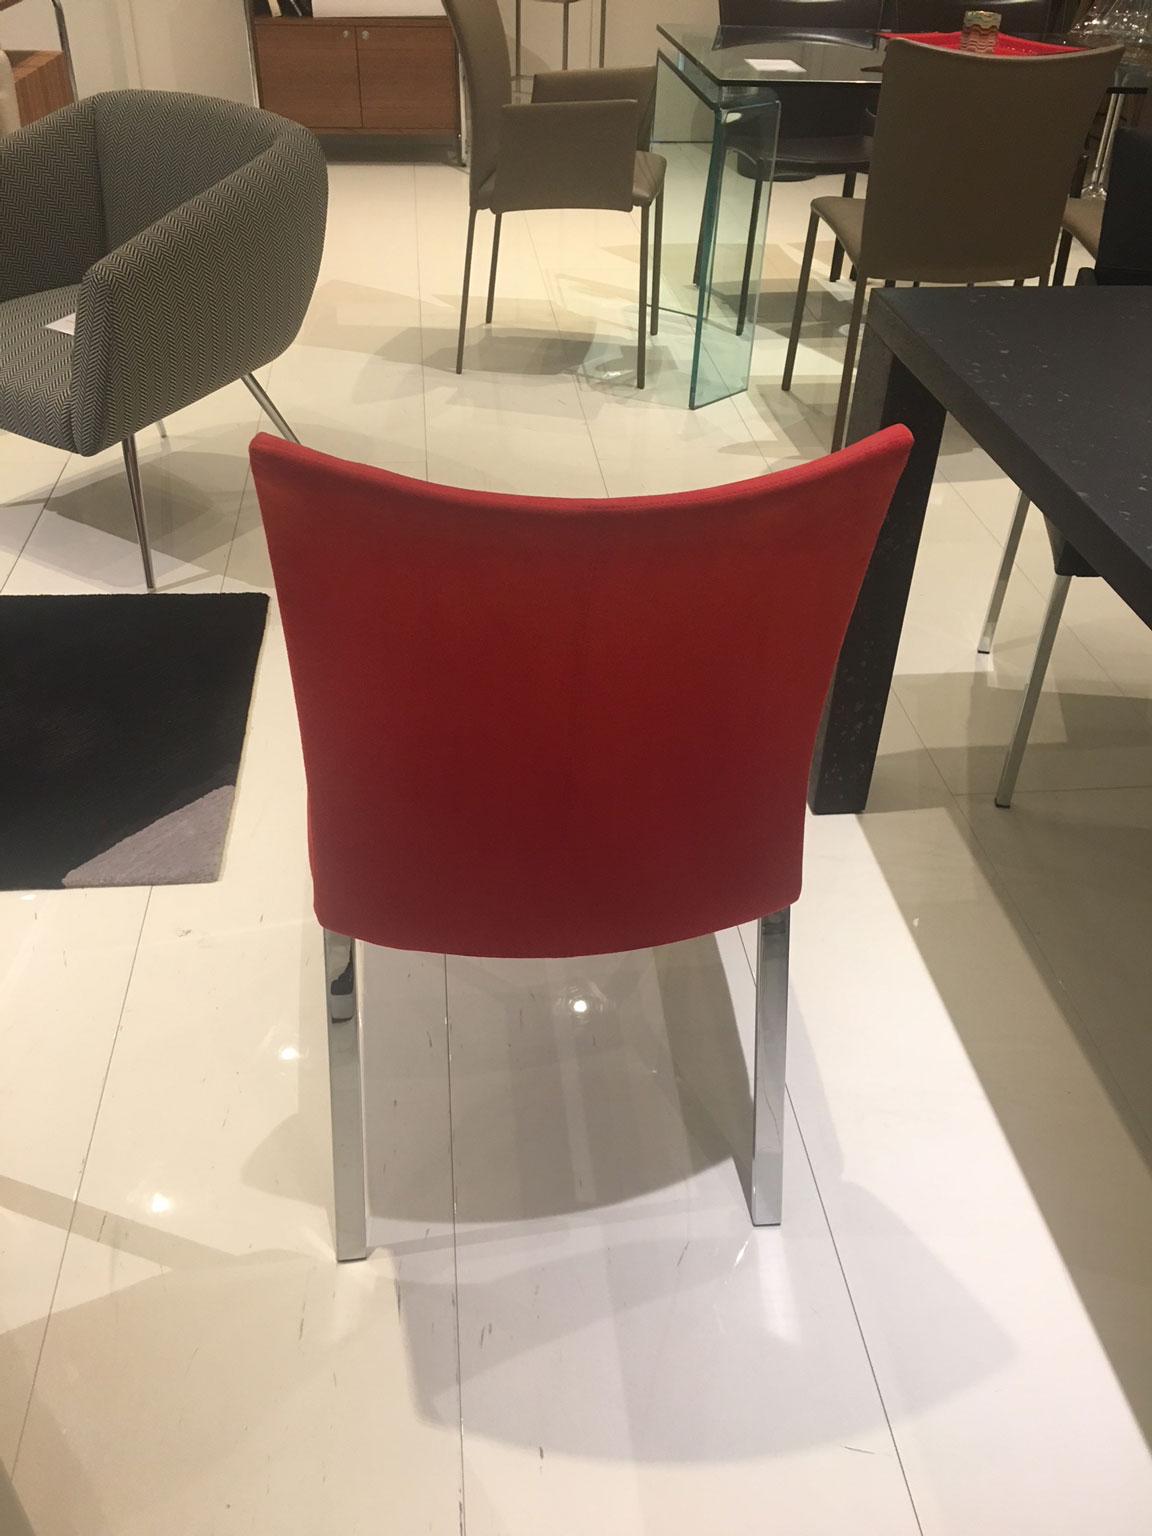 Contemporary Set of 2 Red Alcantera Dining Chairs with Recline Function Polished Chrome Legs For Sale